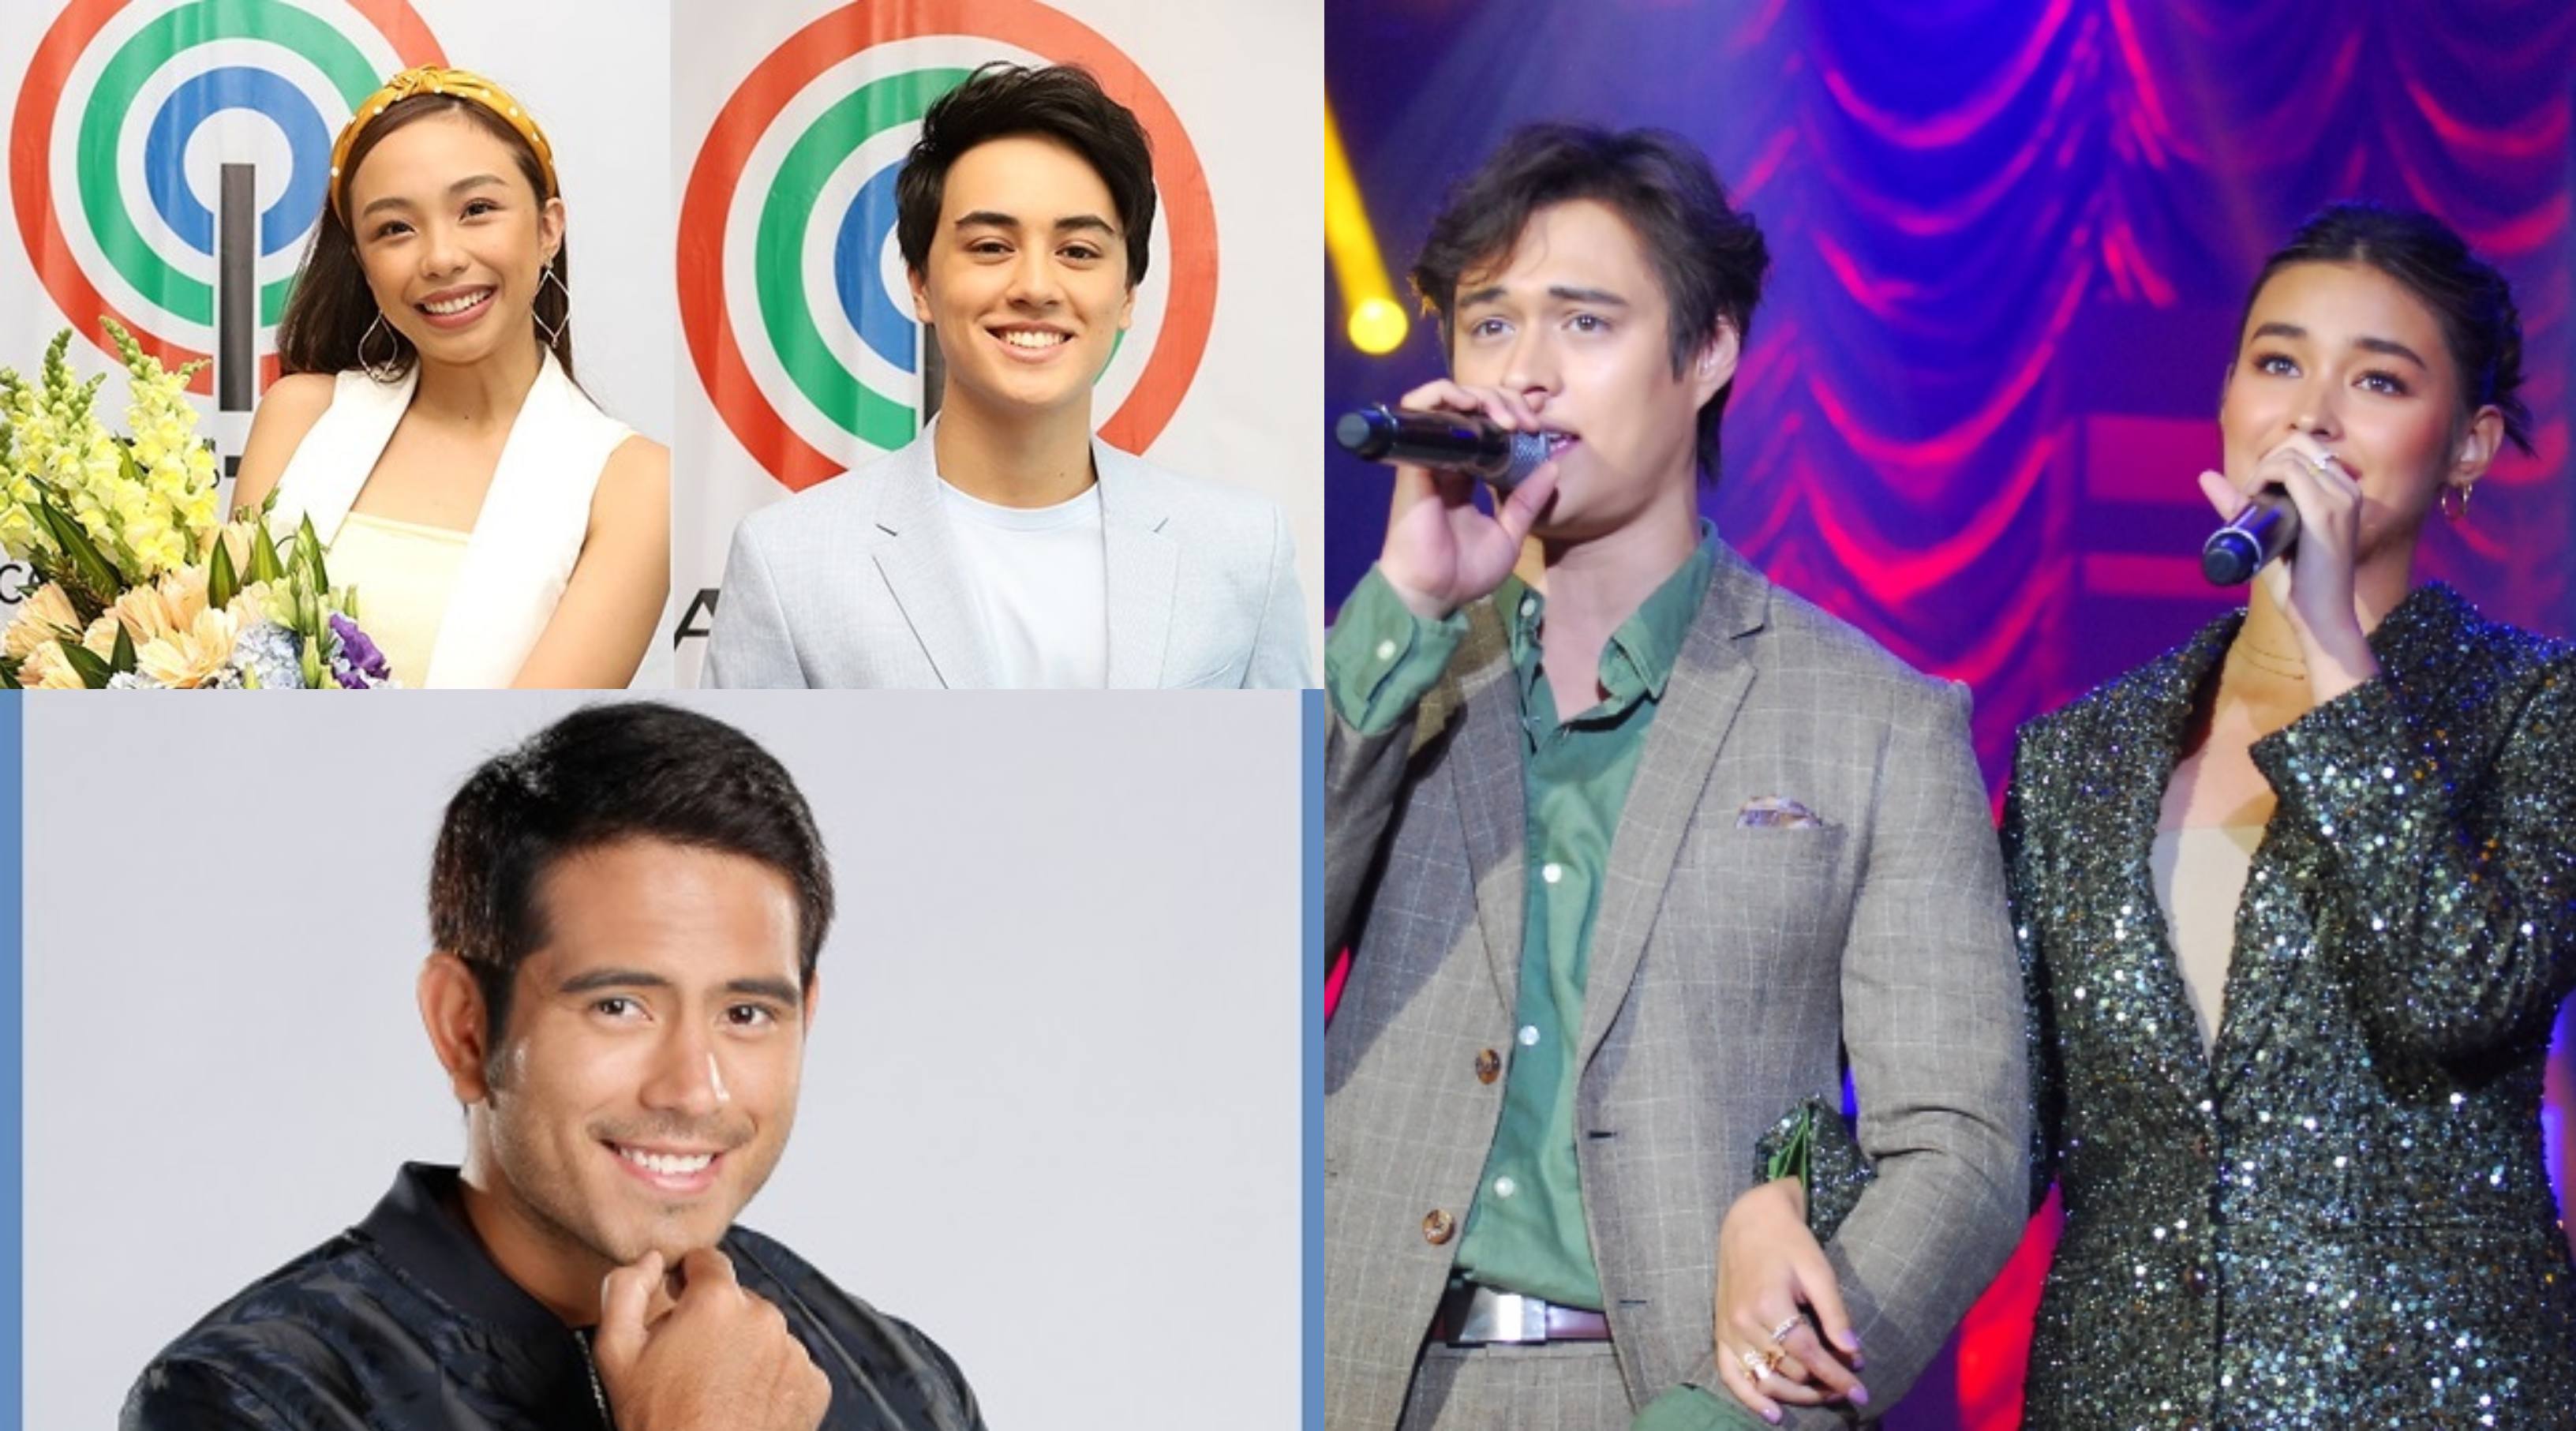 ABS-CBN unleashes big and new TV offerings as 2020 opens